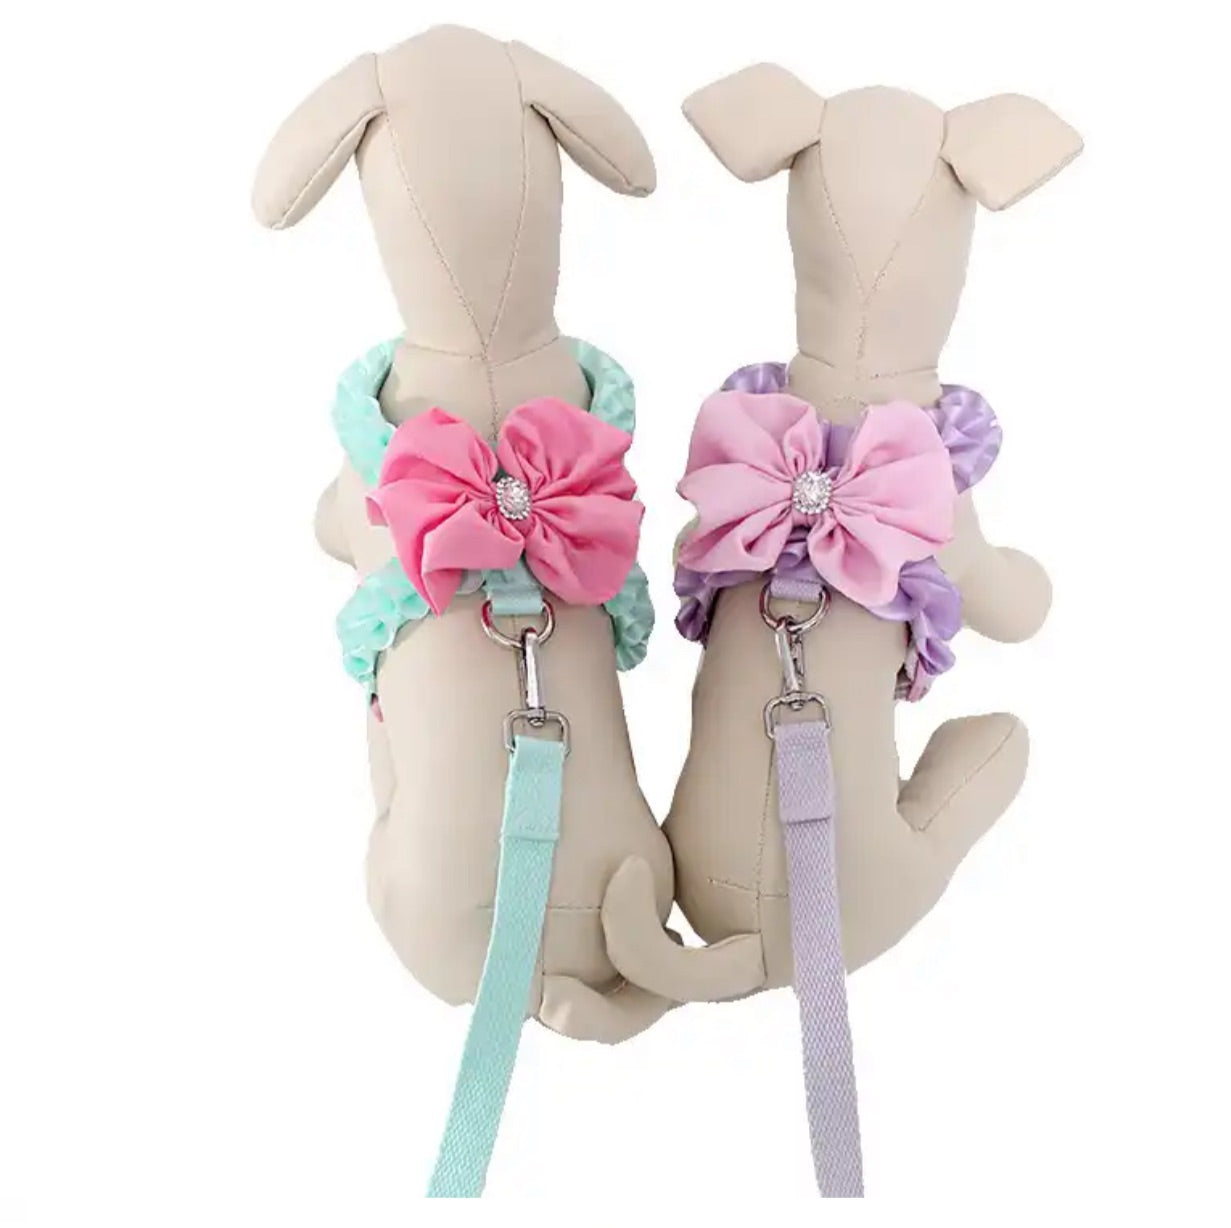 Ruffle Harness and Lead Set - Mint/Pink